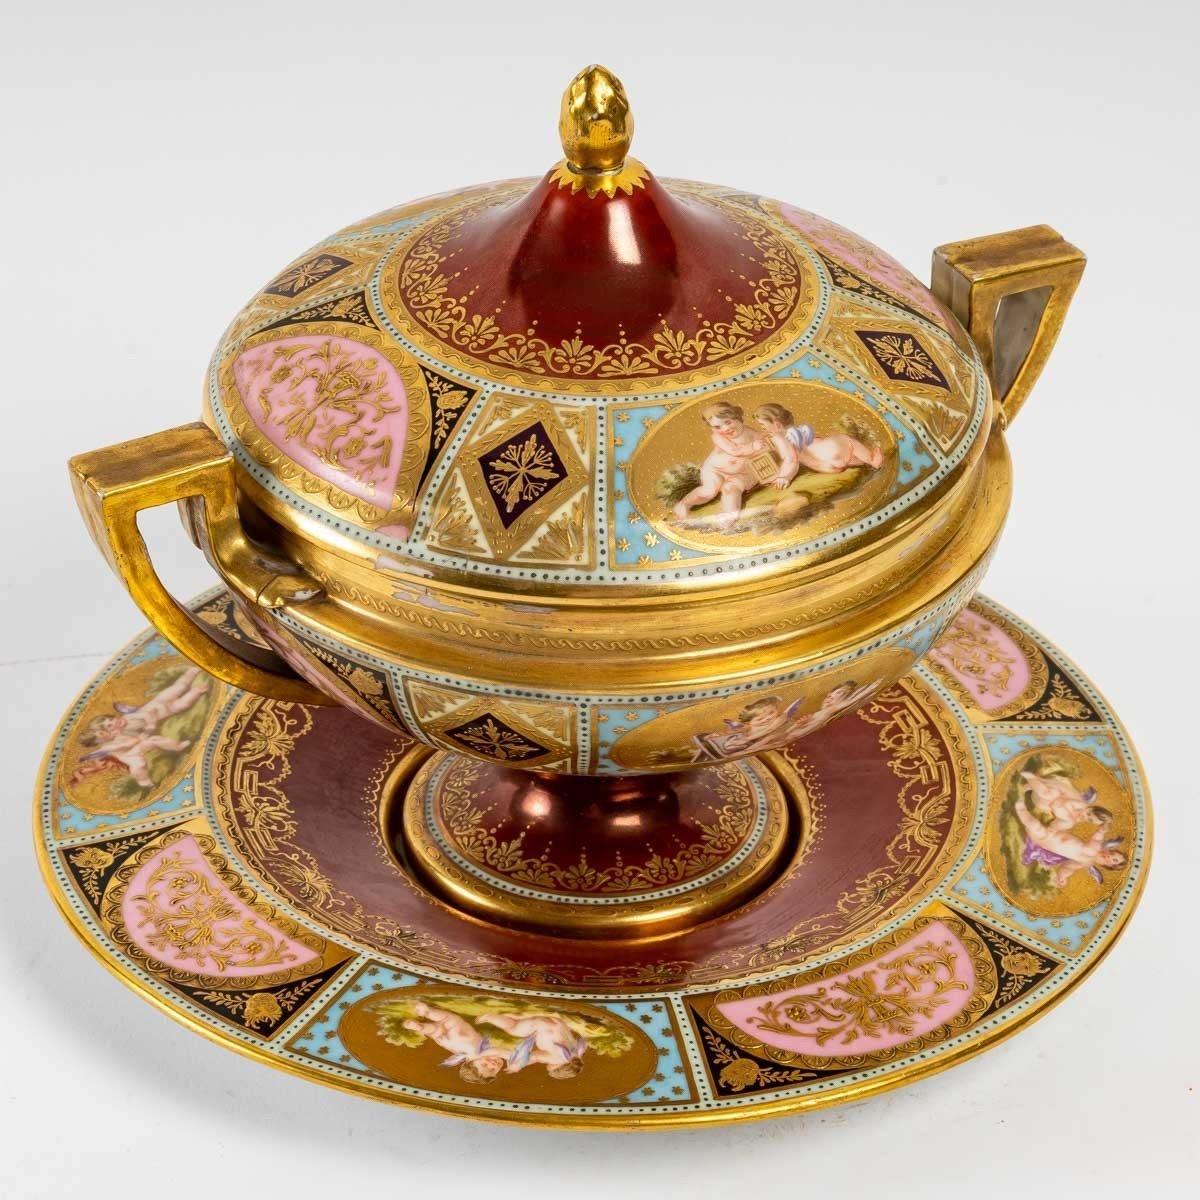 Hand-Painted Covered Bowl, Rich Enameled Decoration, 19th Century